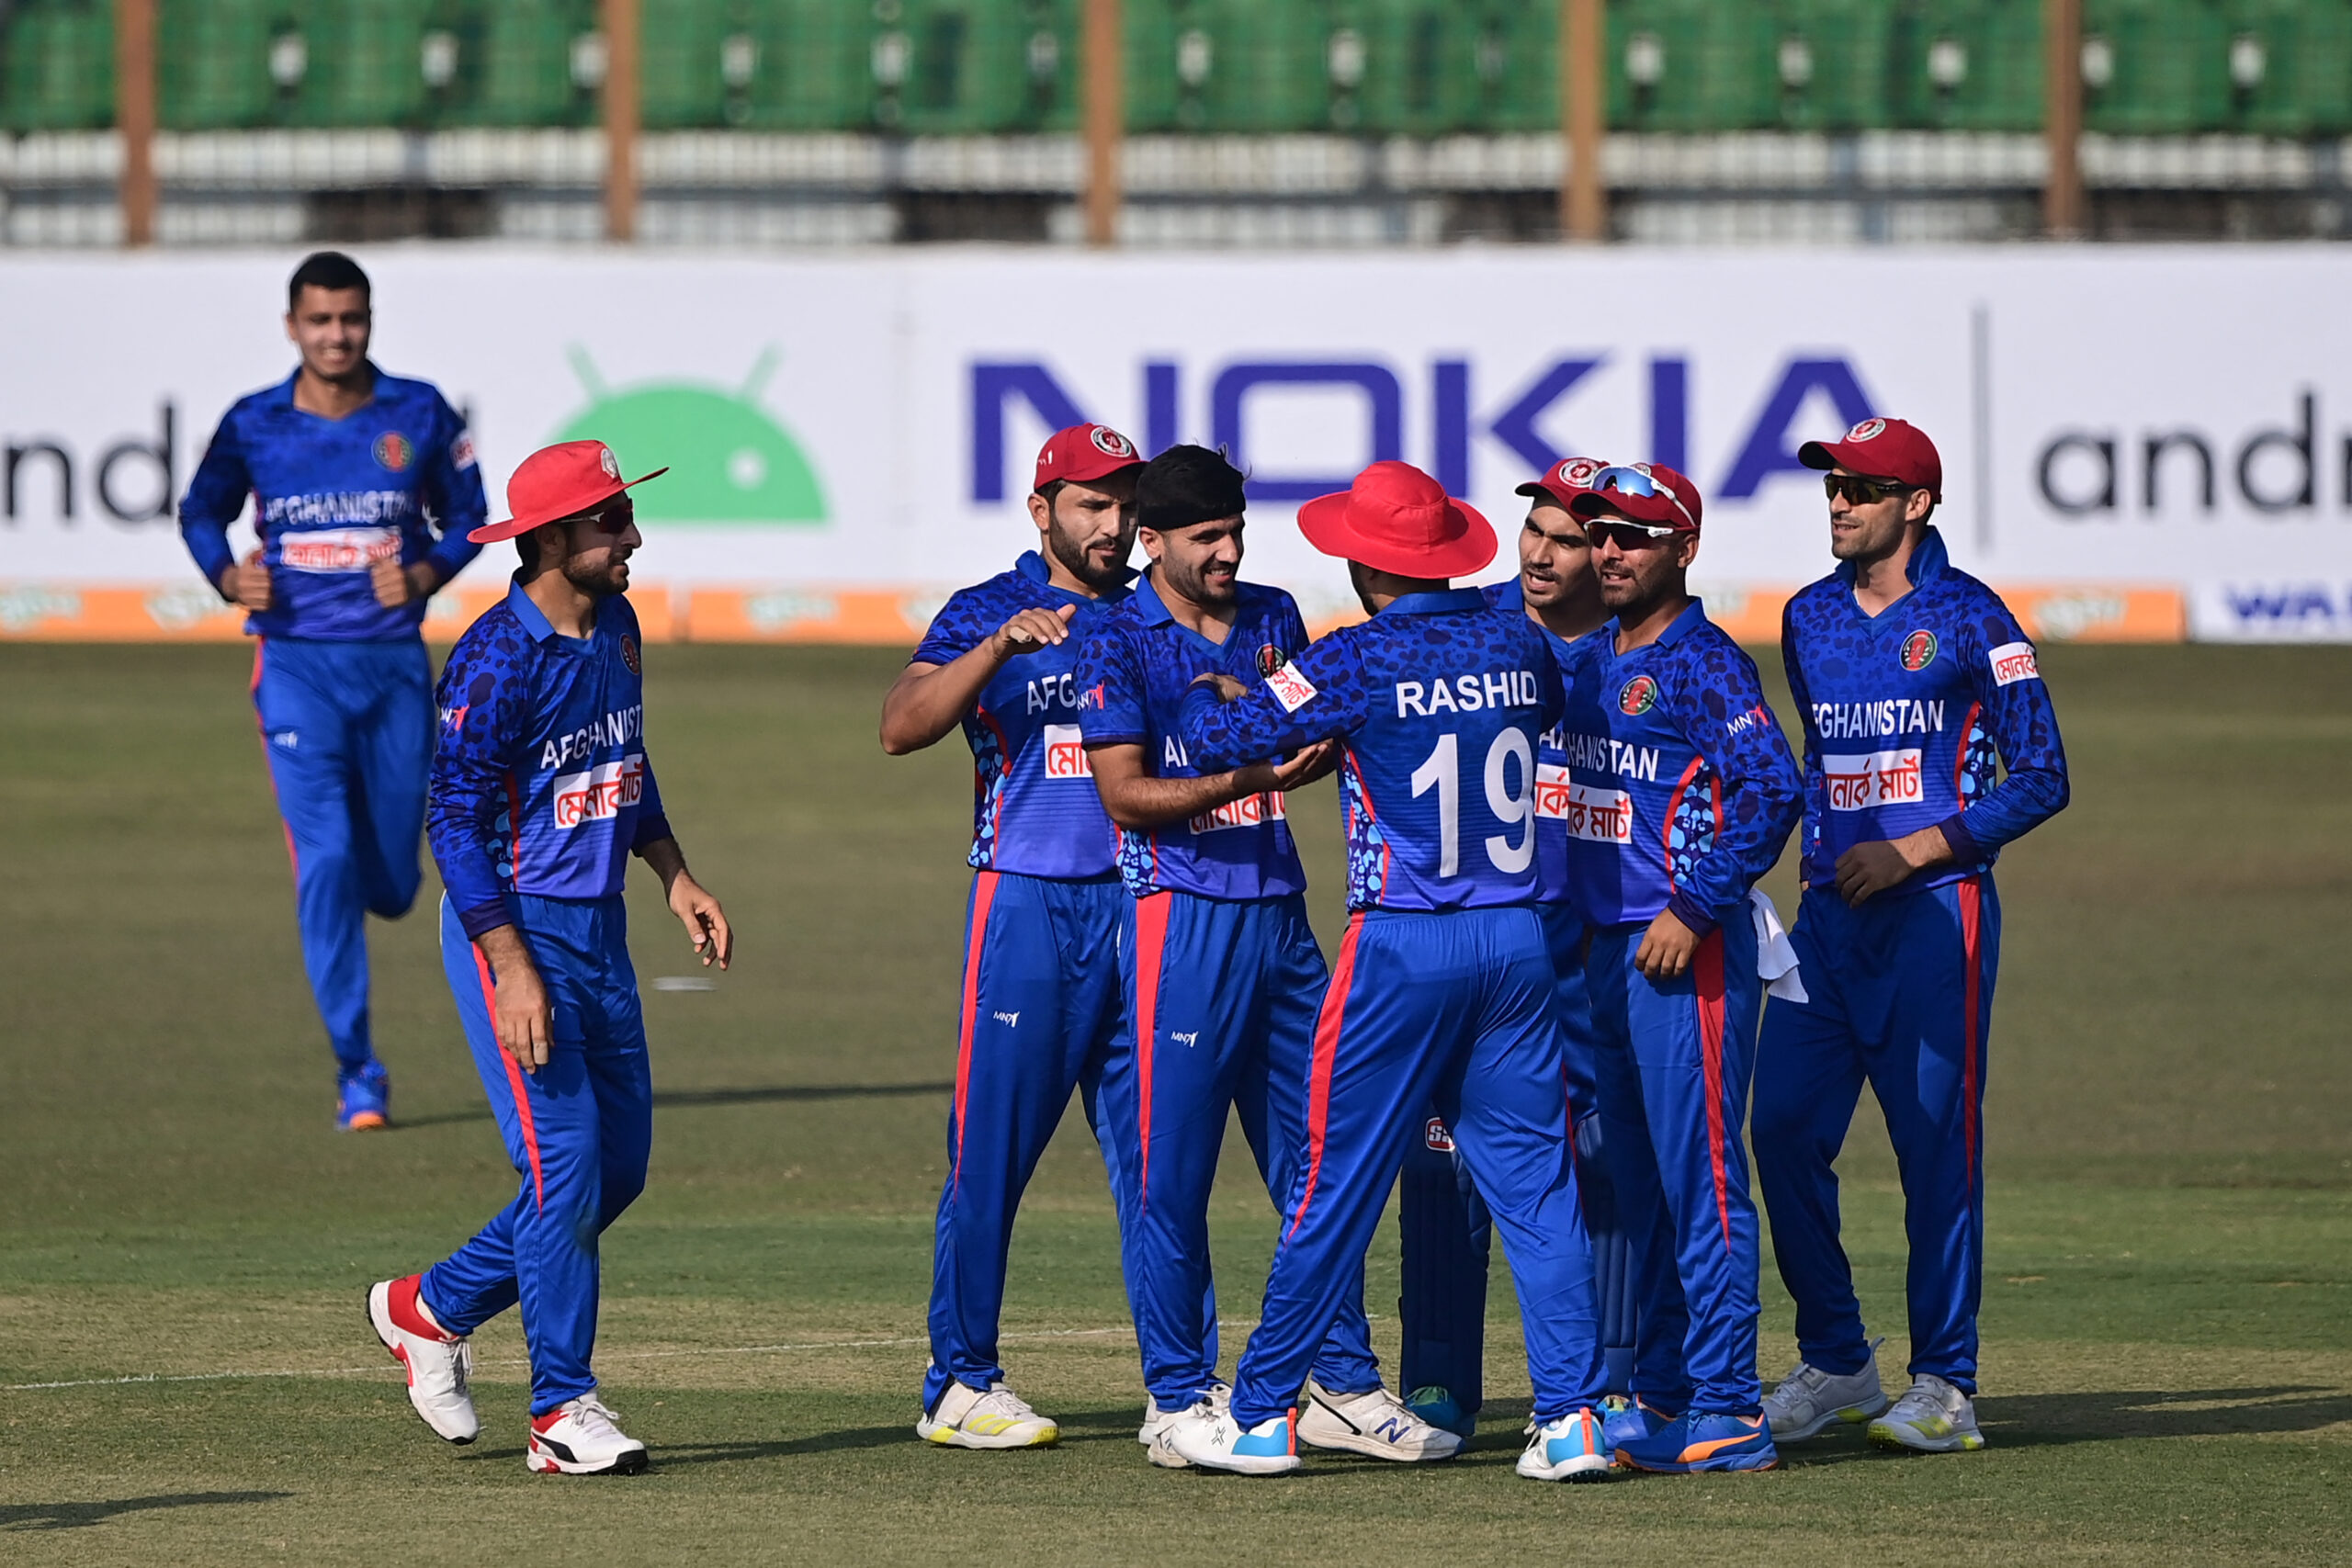 Afghanistan Announce ODI, T20I Squads For Zimbabwe Series, Gulbadin Naib Not Included, Zia-ur-Rehman Gets Call-up